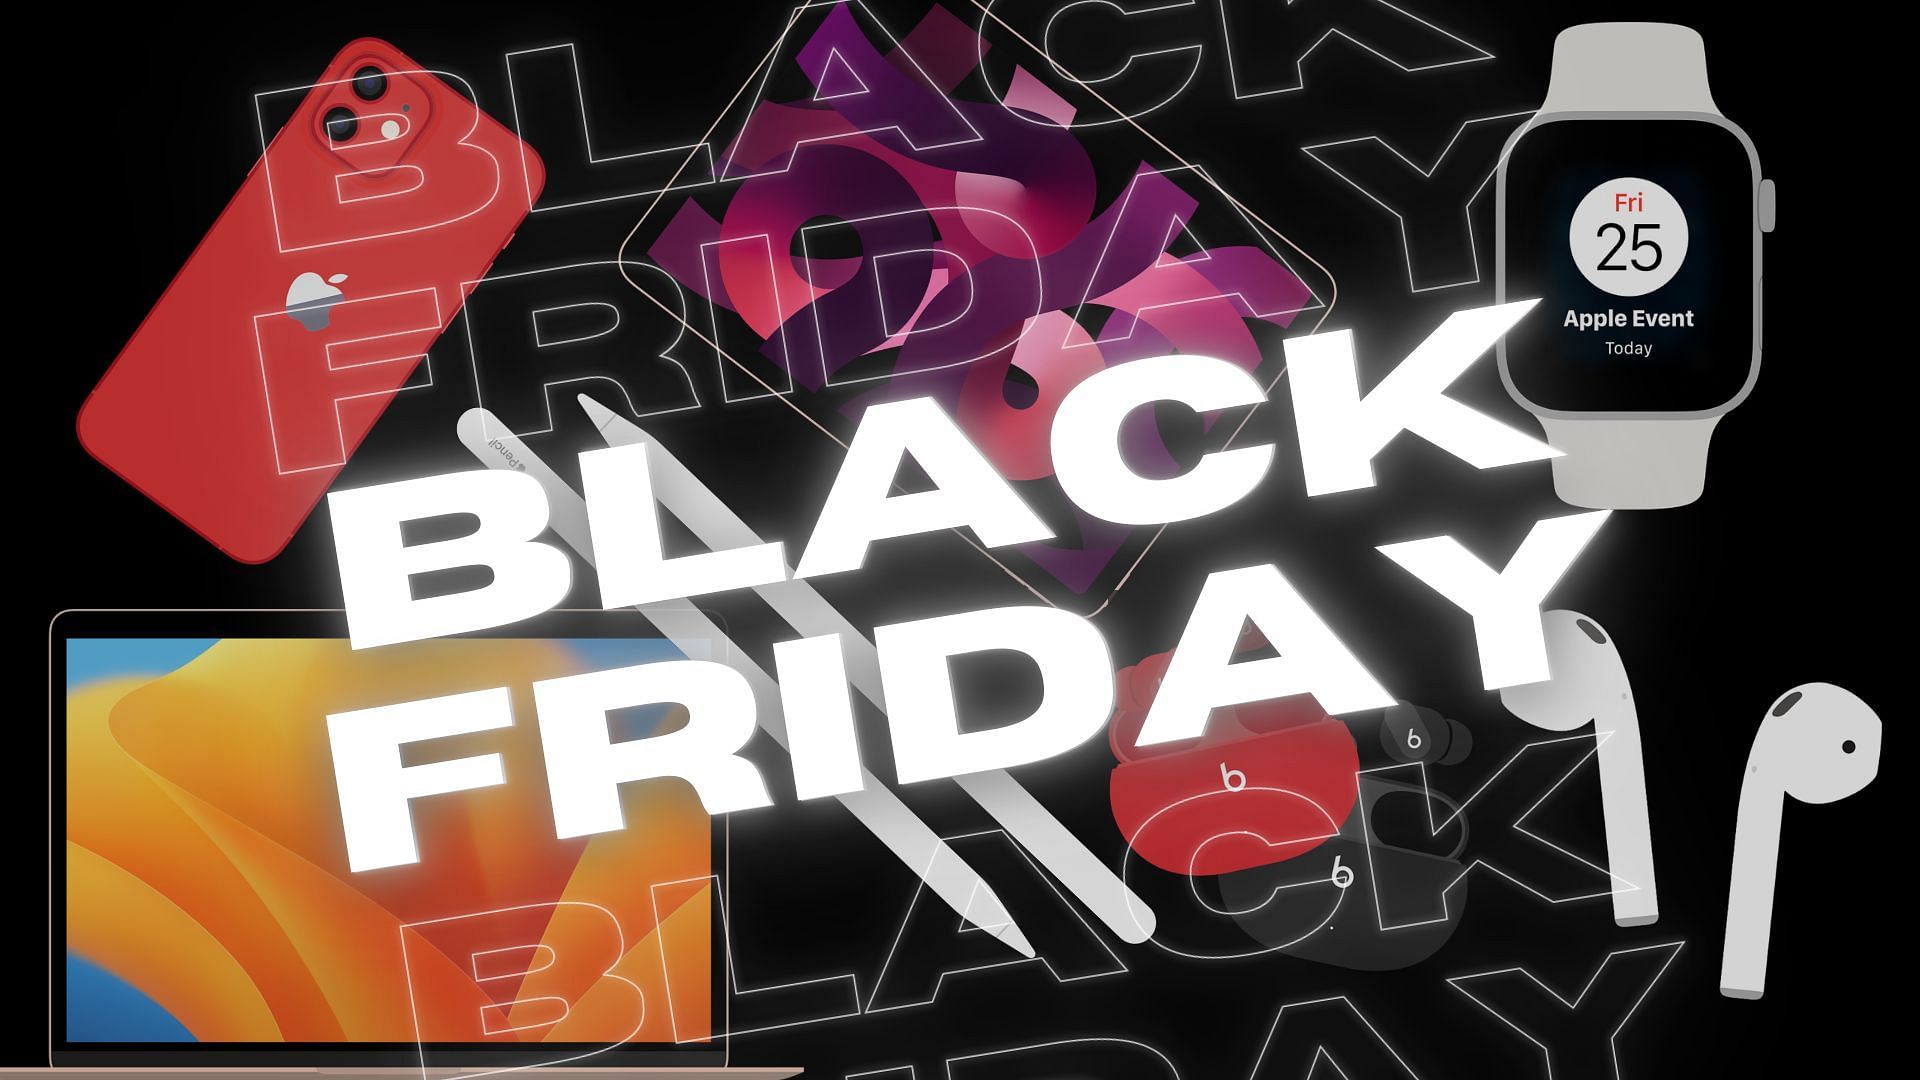 Apple products have been massively discounted this Black Friday (Image via Sportskeeda)